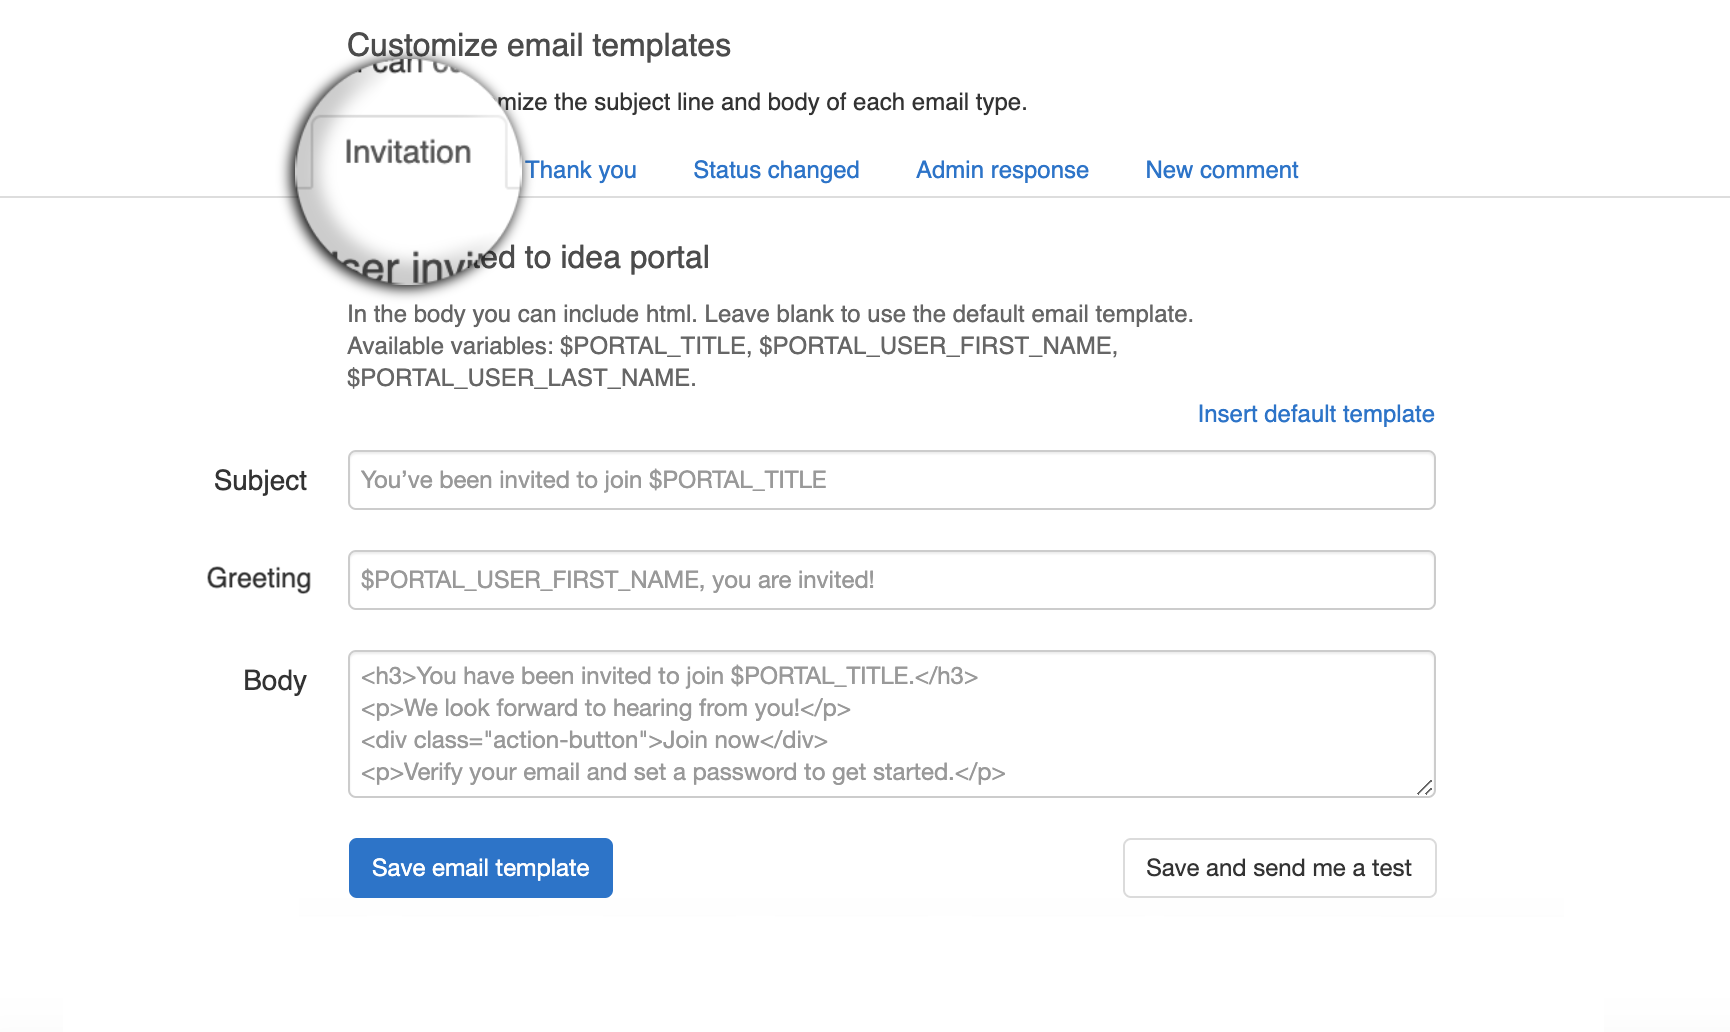 You can use HTML to further customize the email design and formatting.